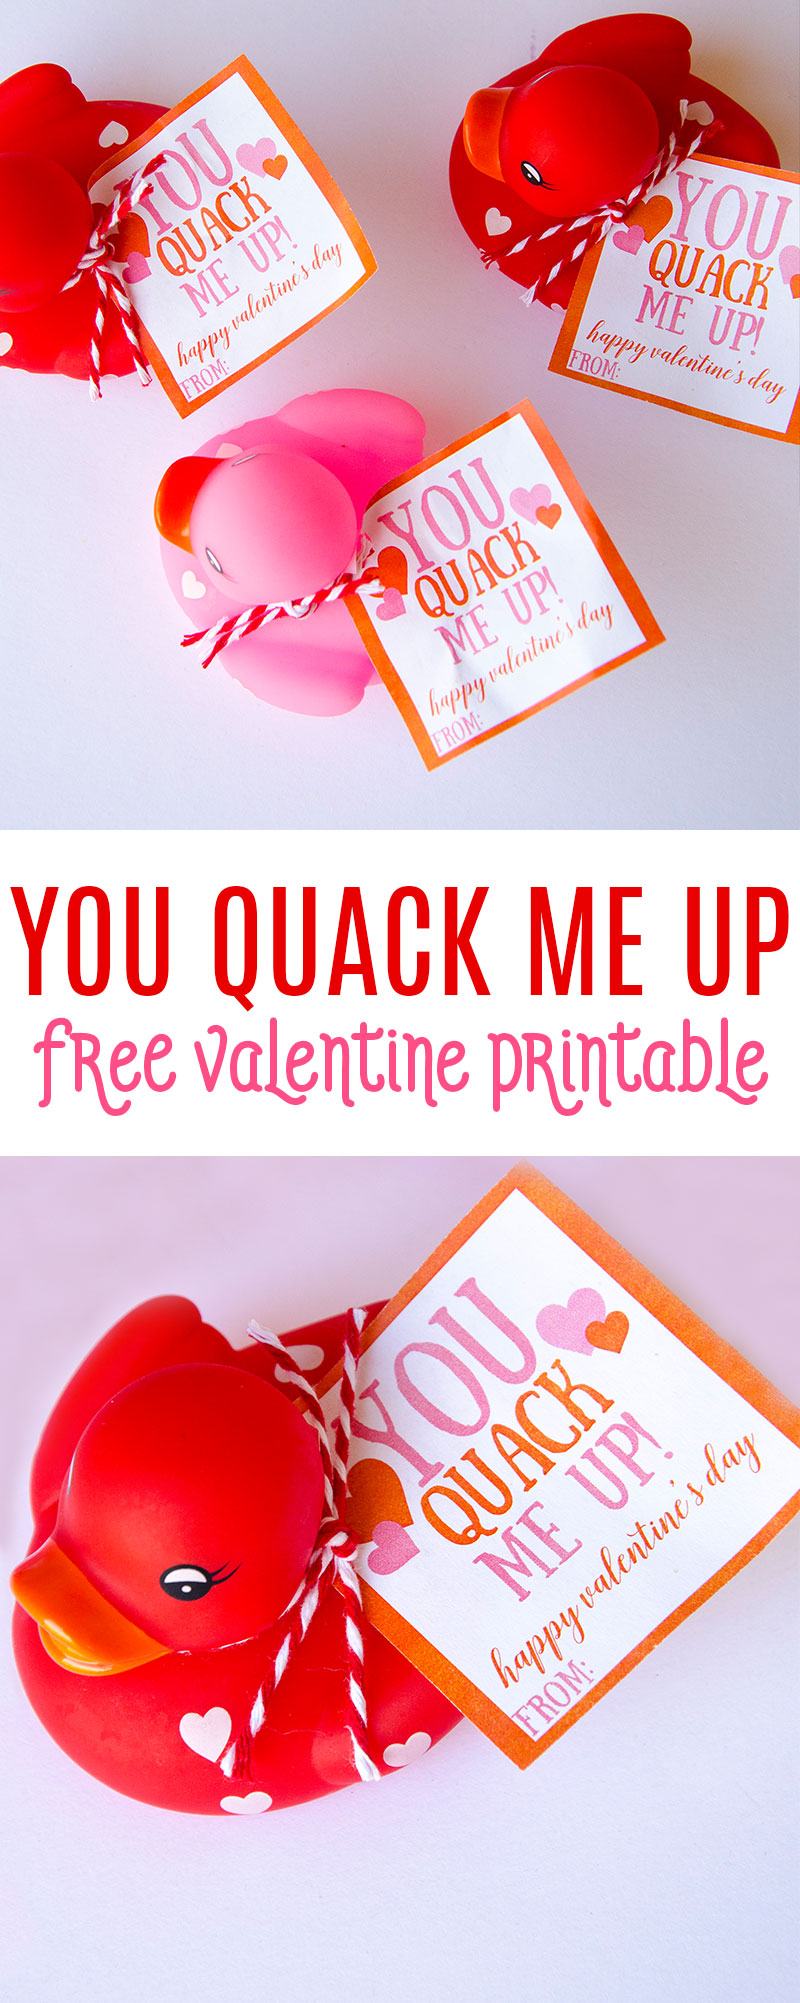 Rubber Duck Valentine Idea by Lindi Haws of Love The Day